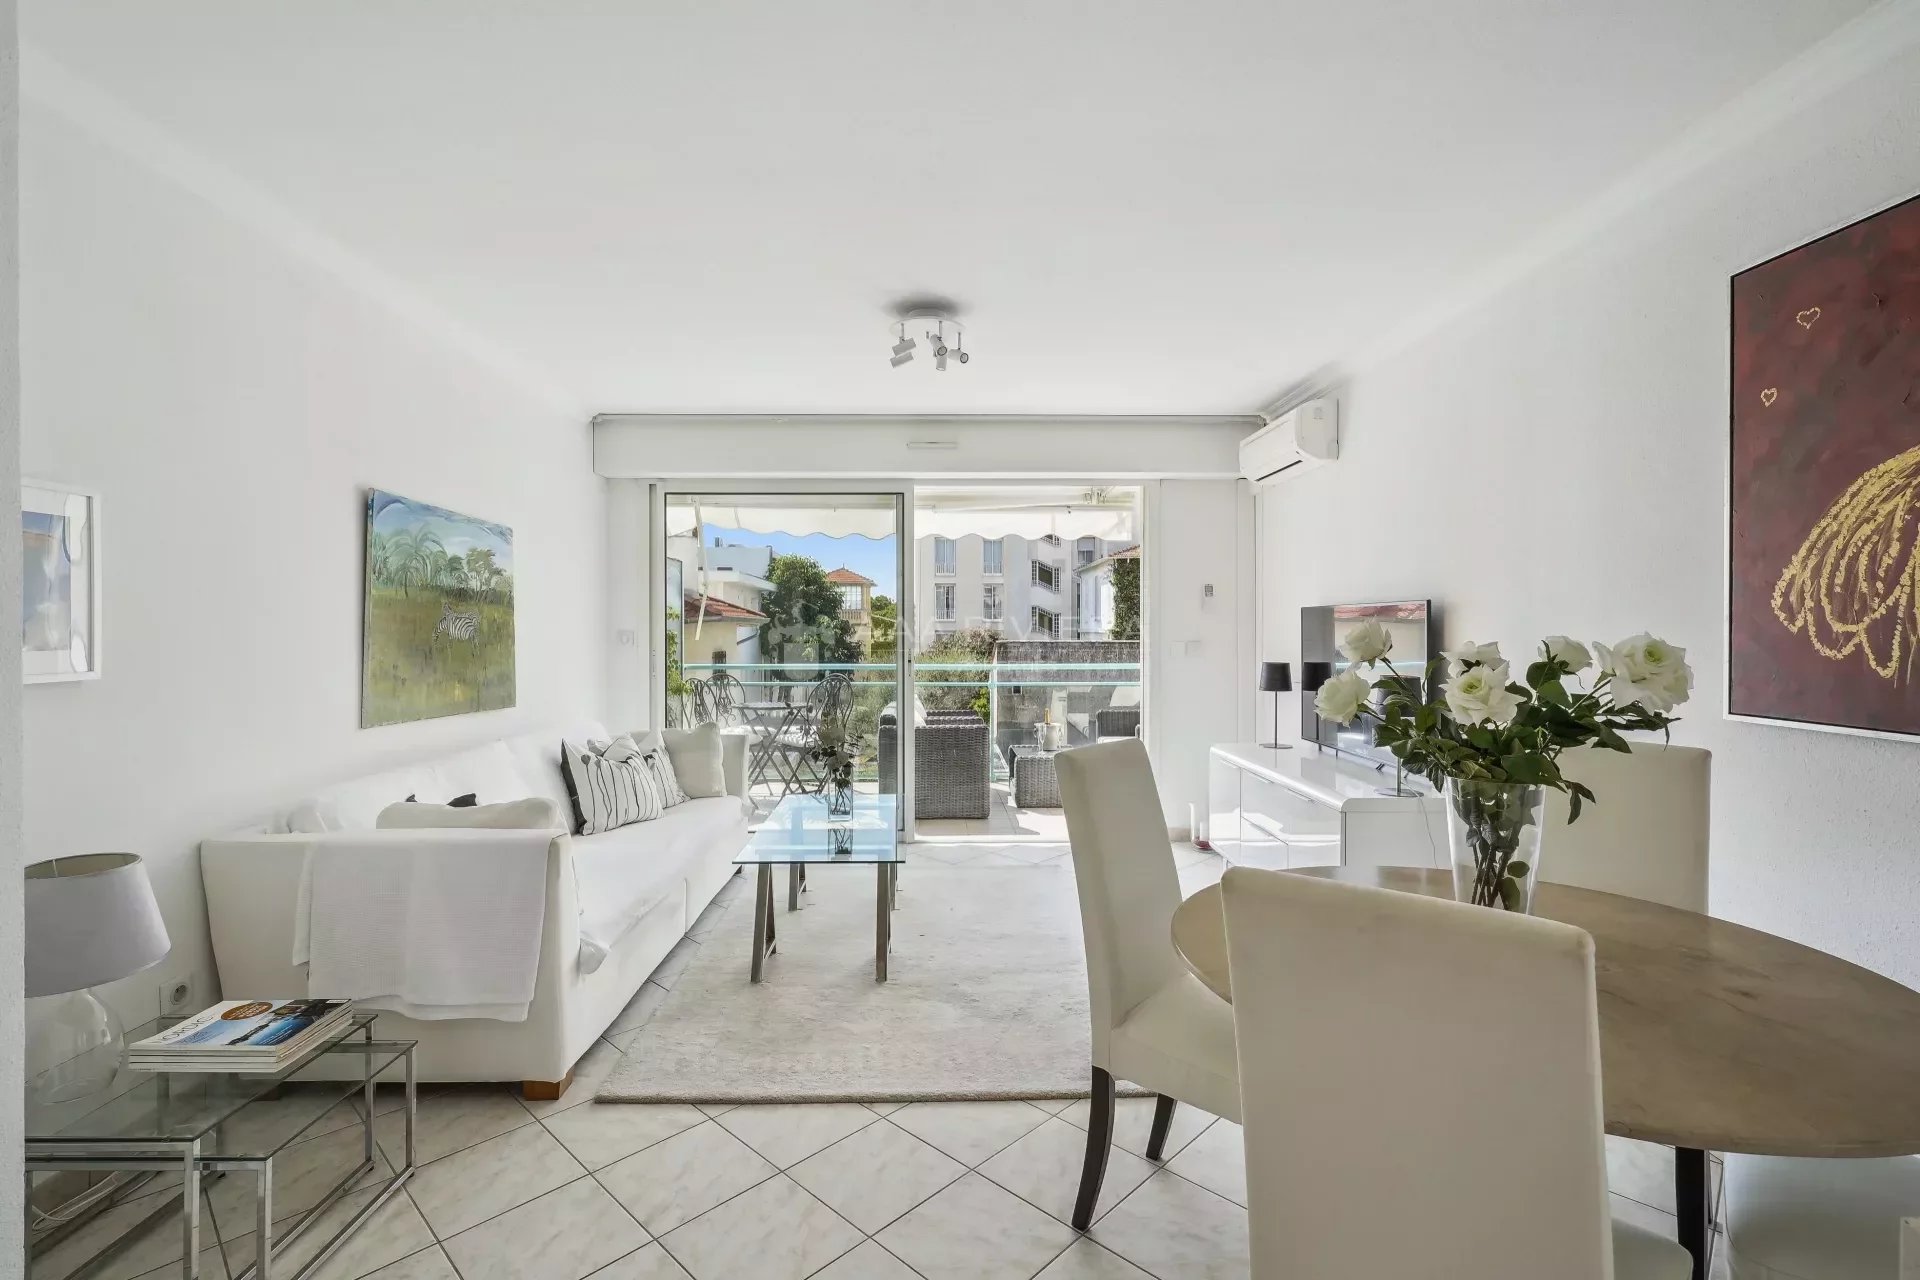 Juan-les-Pins Pinède - JOINT SOLE AGENT - Bright 2 bedroom apt with terraces and garage